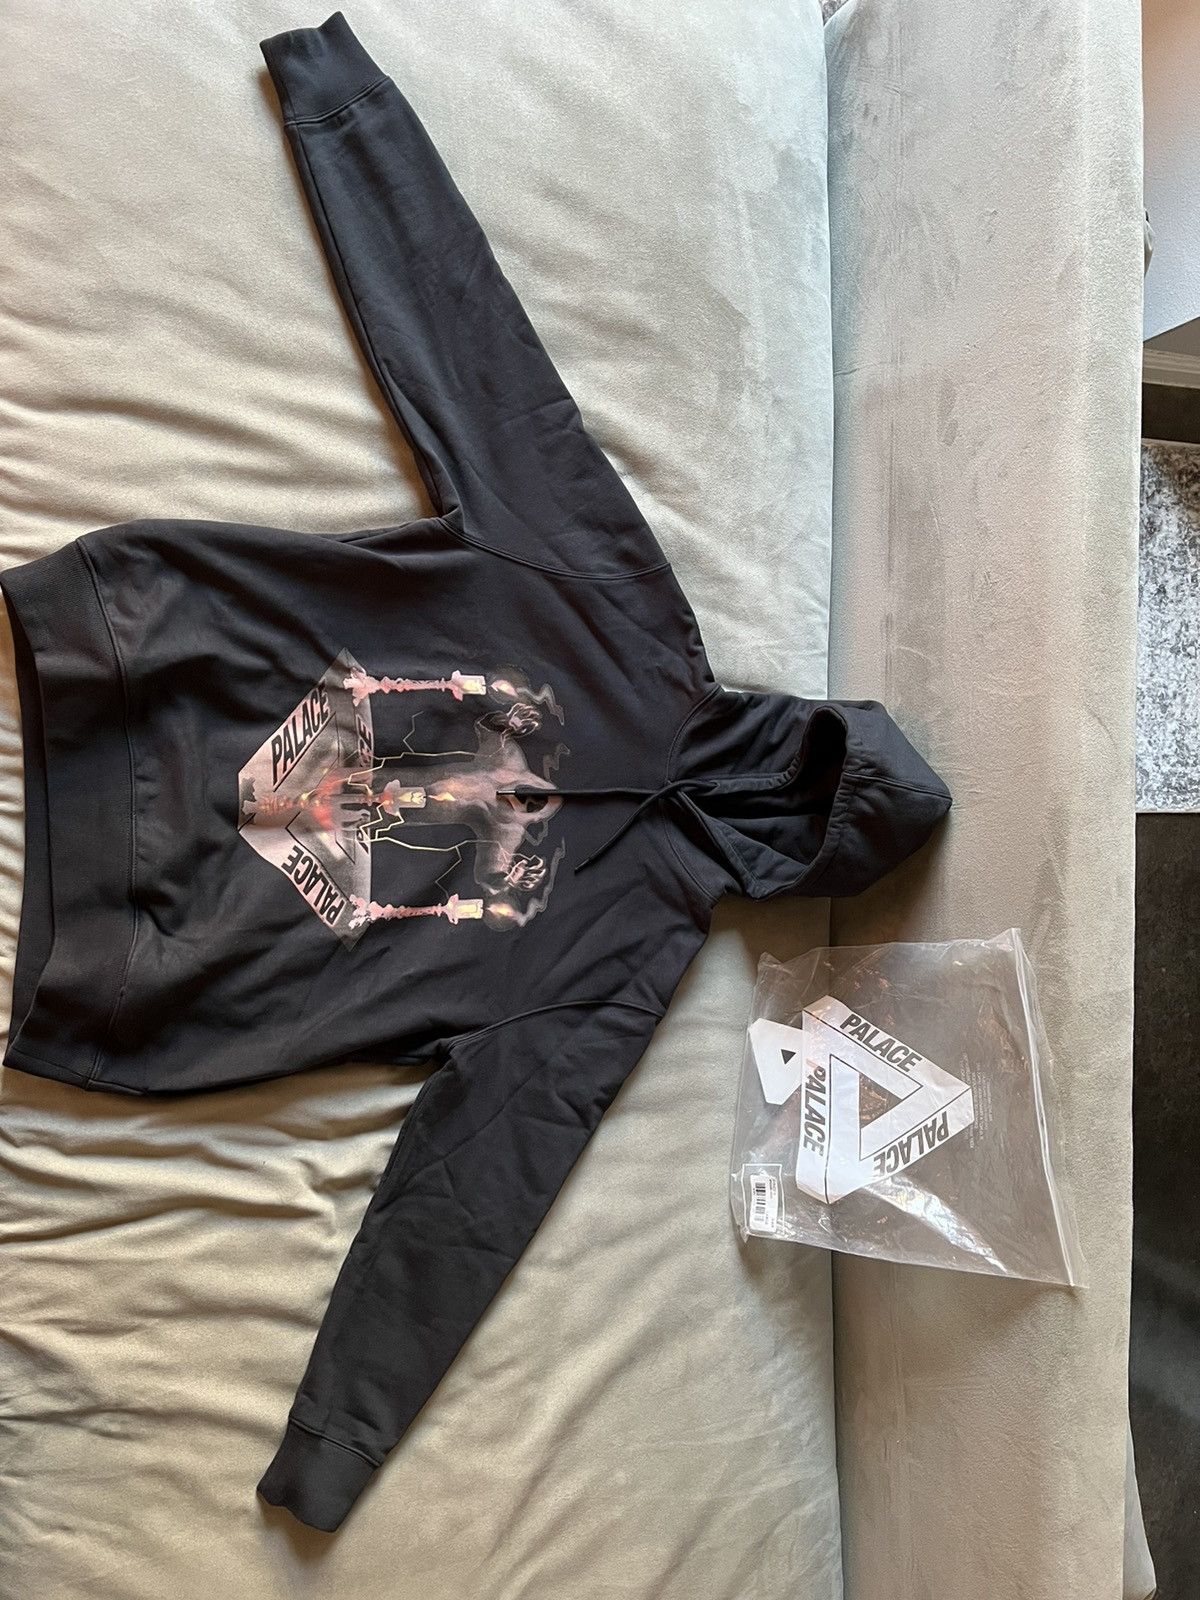 Palace Palace Spooked hoodie | Grailed